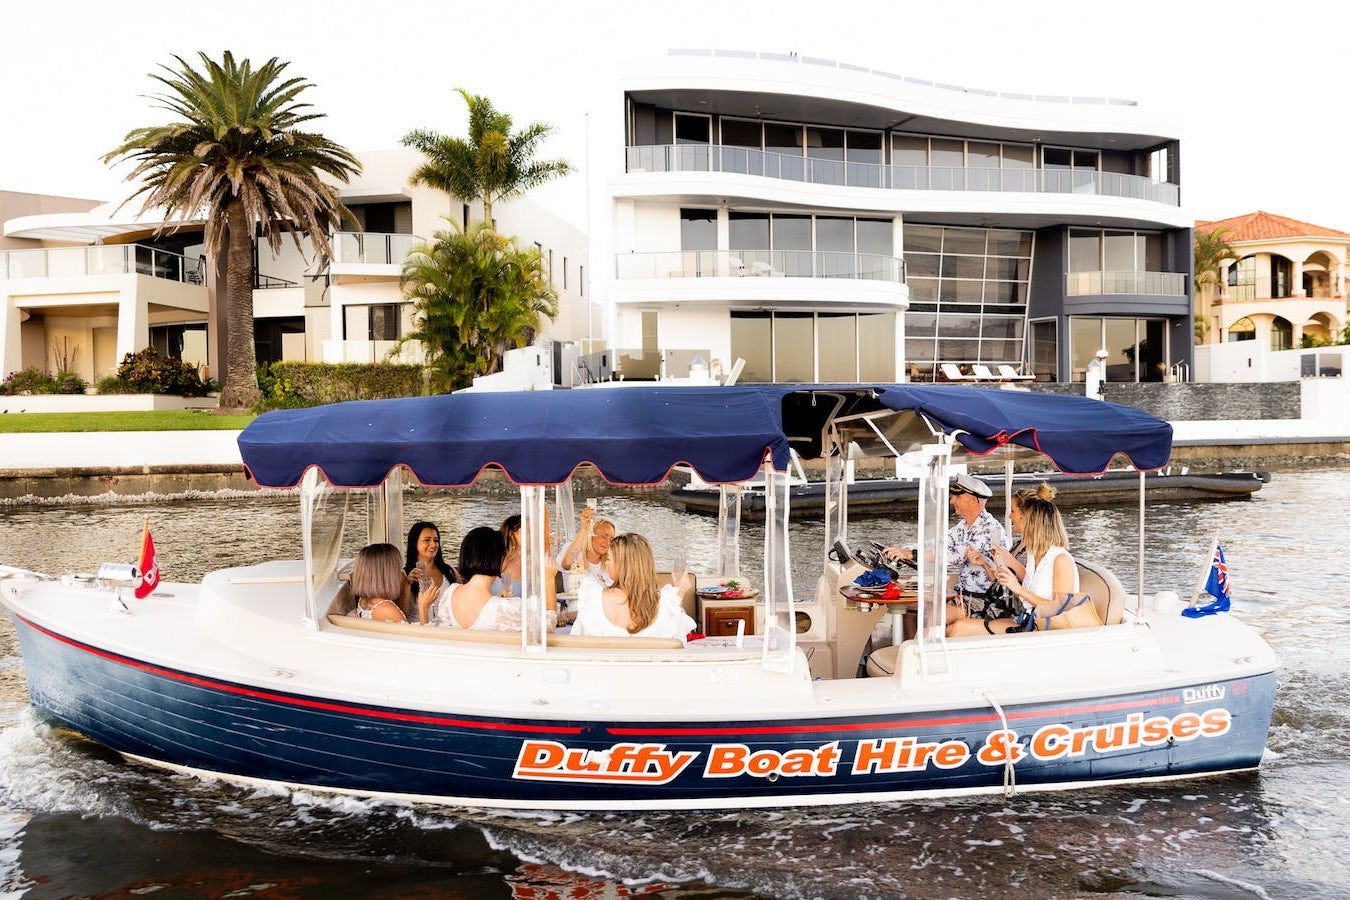 duffy down under boat hire cruises & tours